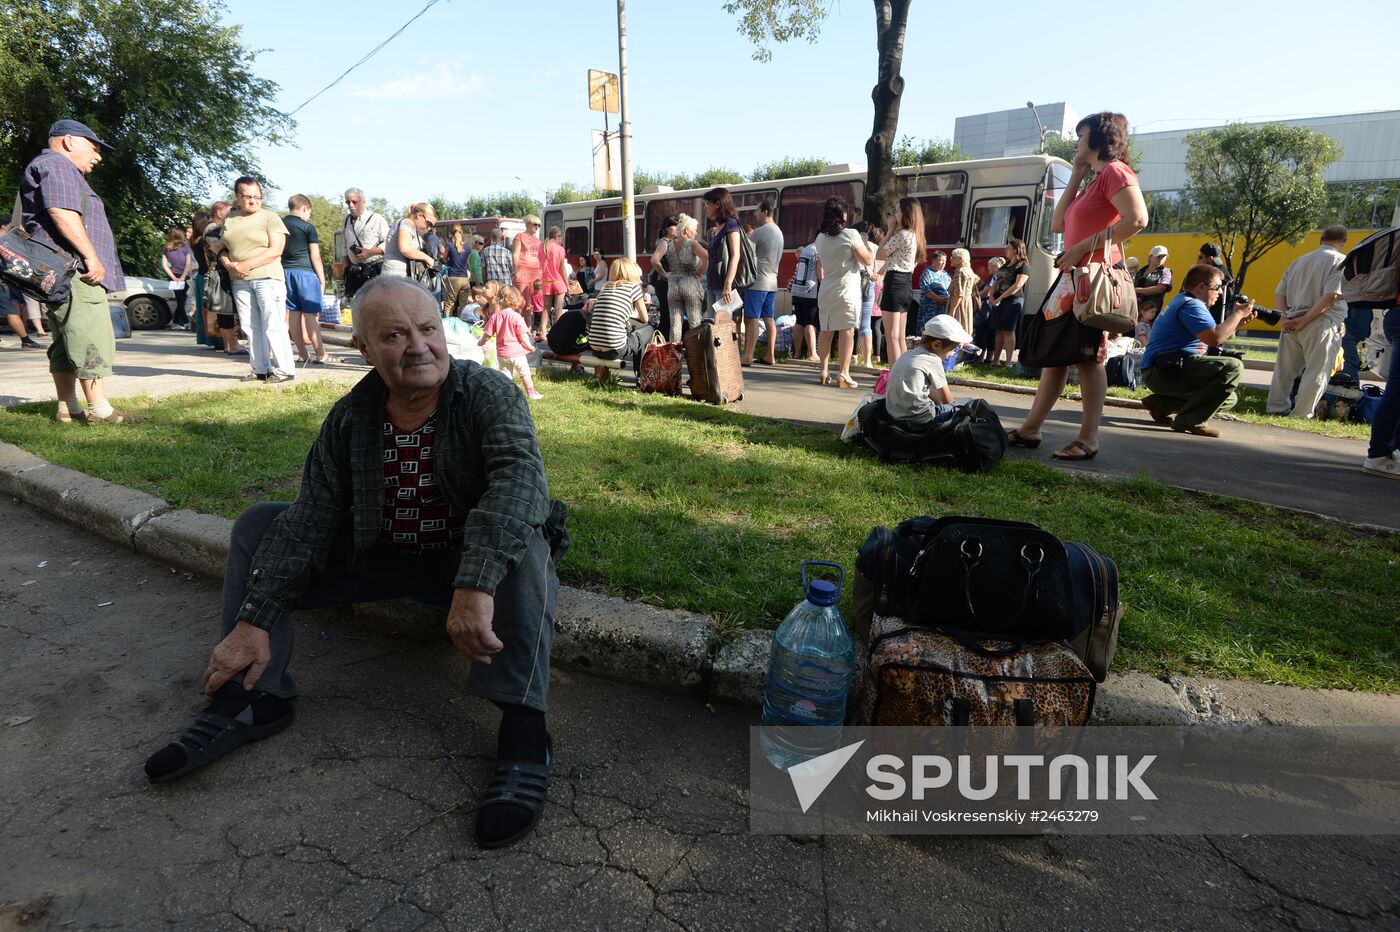 Another group of refugees from Donetsk escaping to Russia